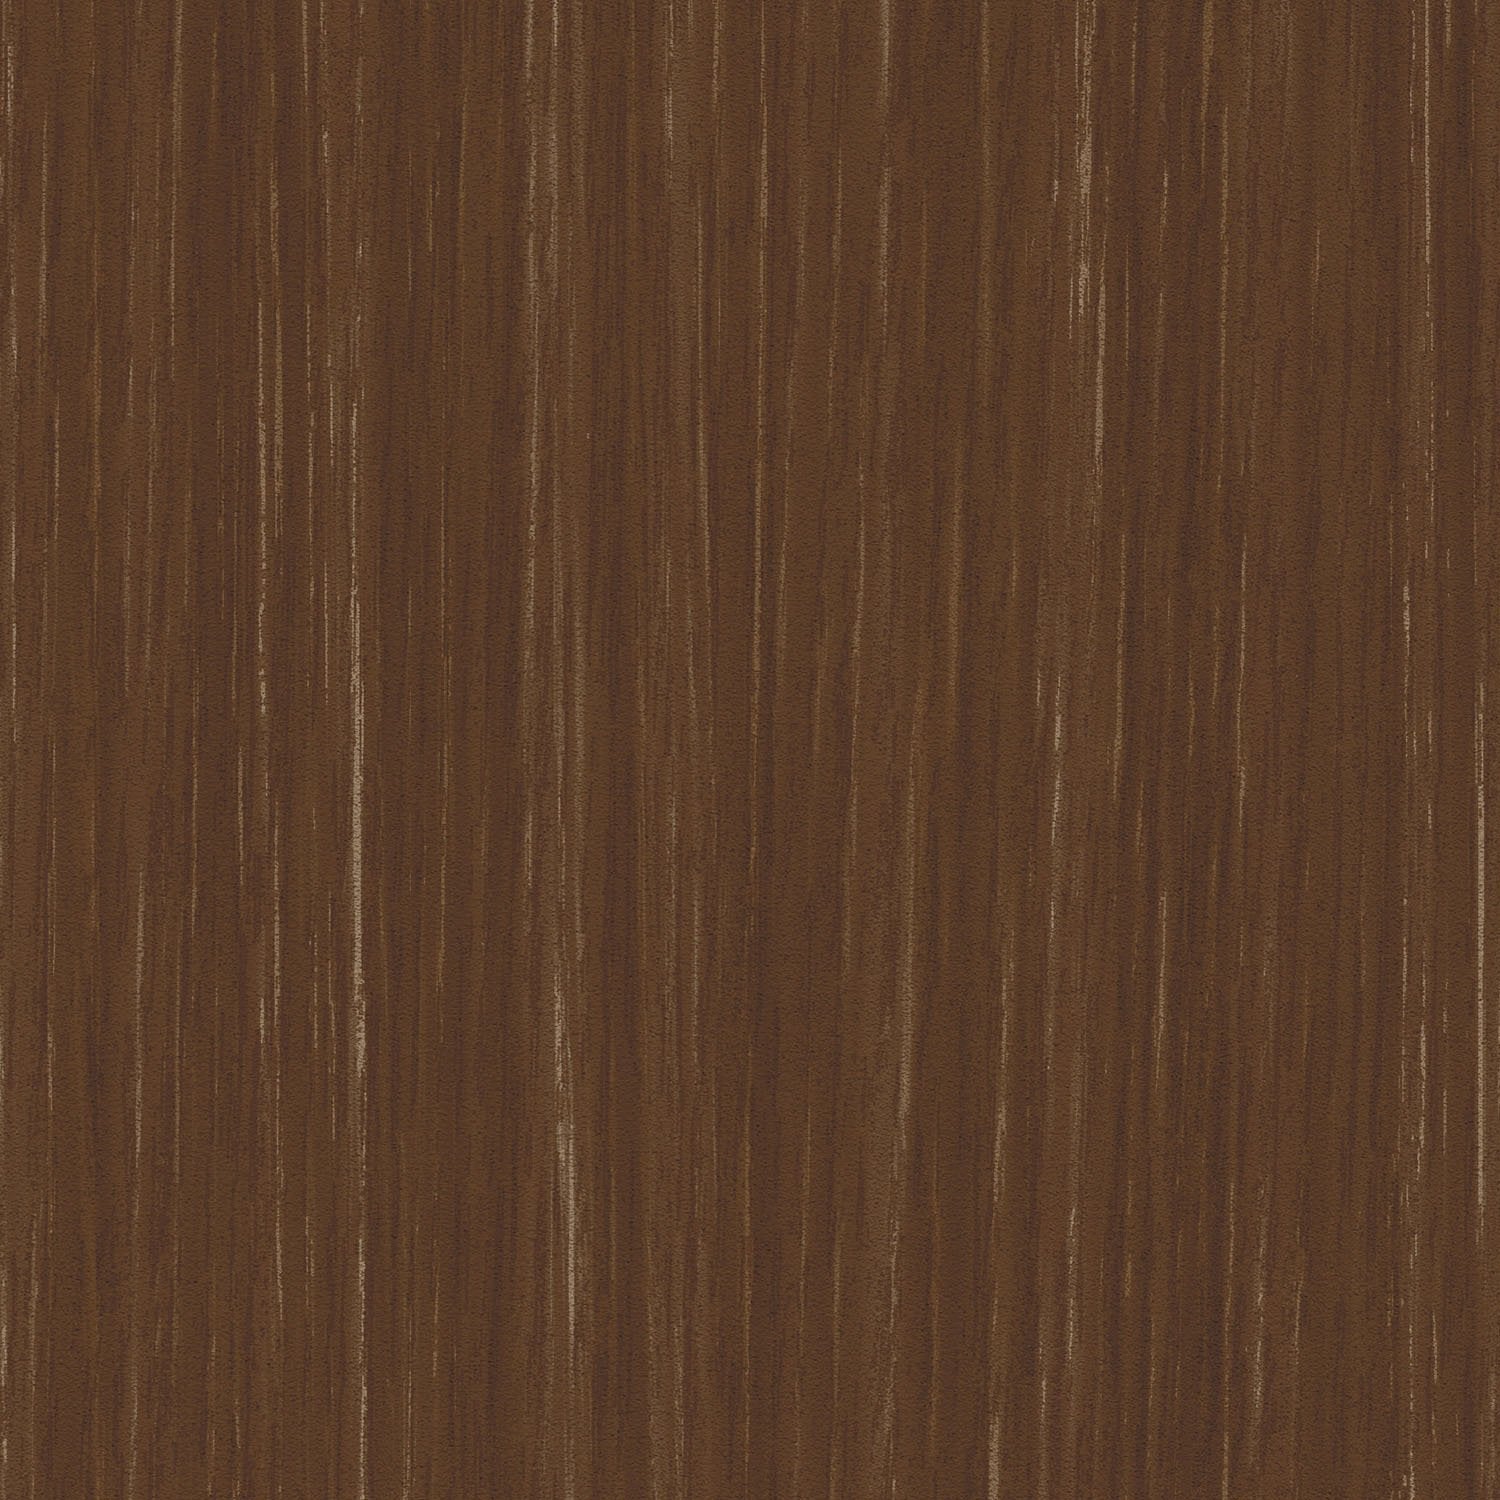 Sherwood - Y47975 - Wallcovering - Vycon - Kube Contract